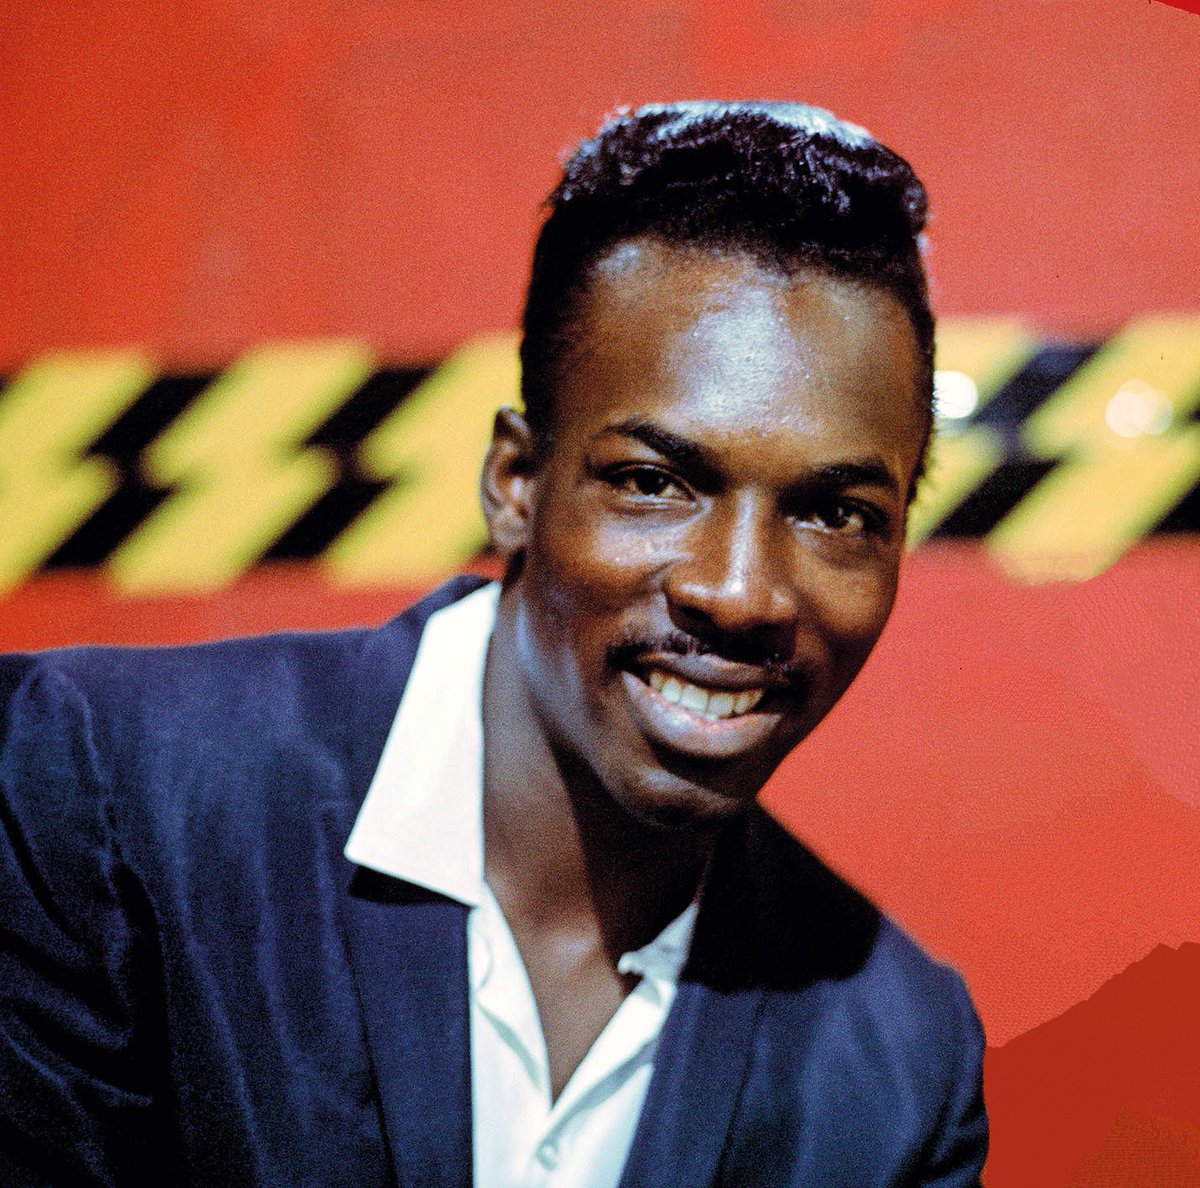 American entertainer #WilsonPickett died from a heart attack #onthisday in 2006. 🎤 #soul #singer #music #trivia